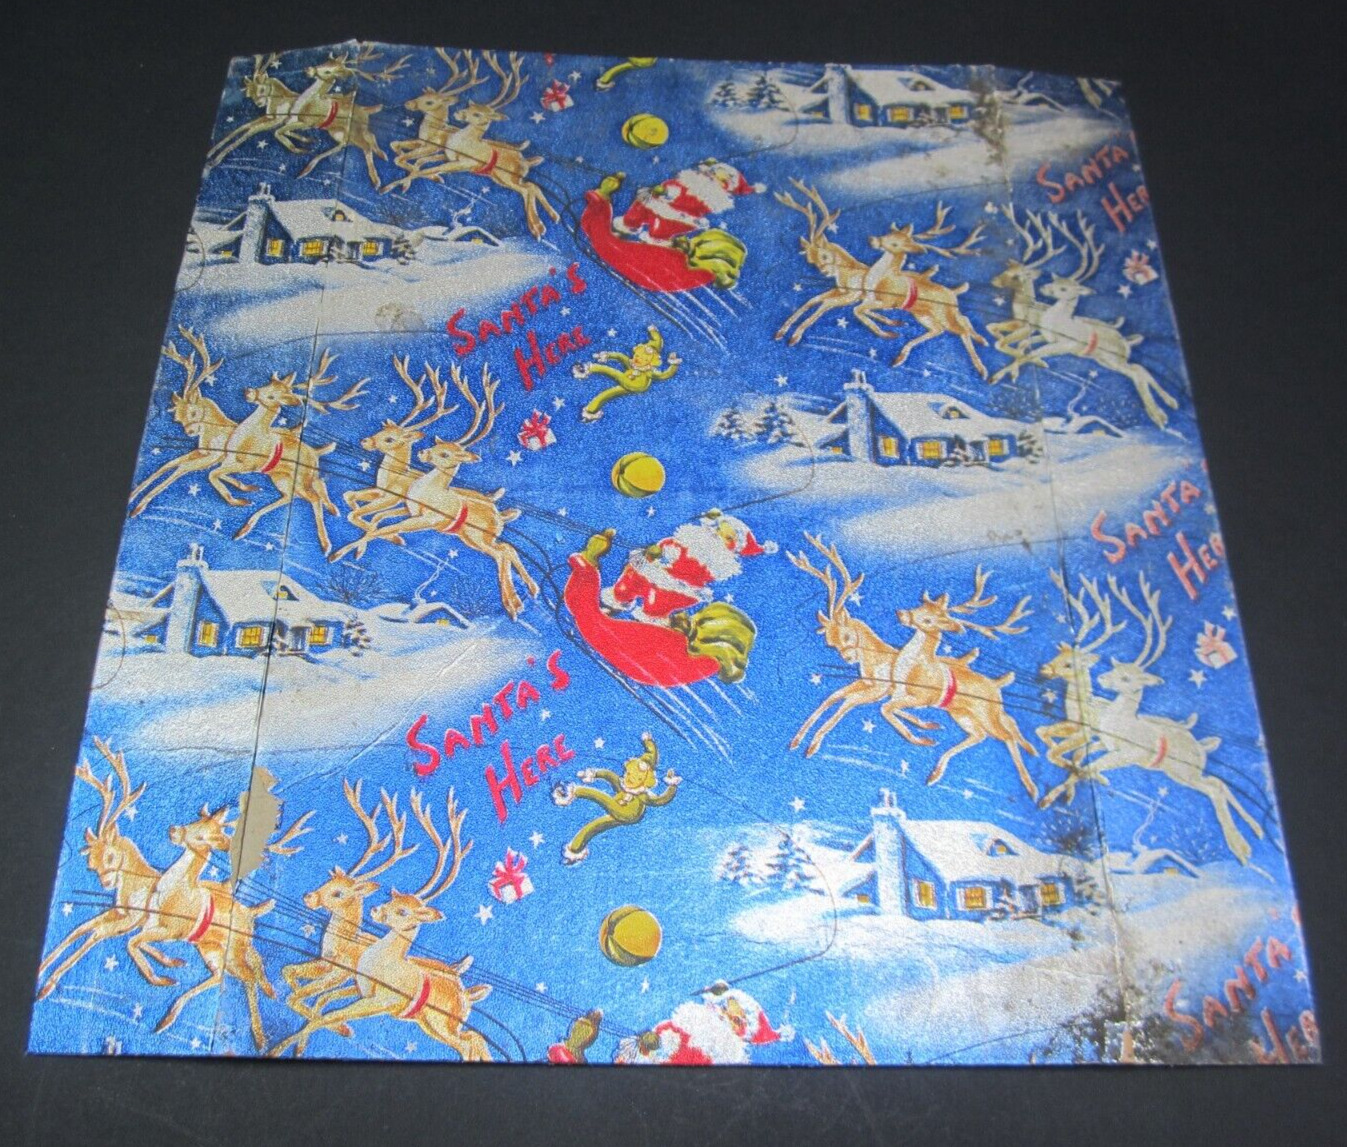 Old Vintage c.1940's - SANTA'S HERE - Santa Claus - Christmas Candy Box Cover